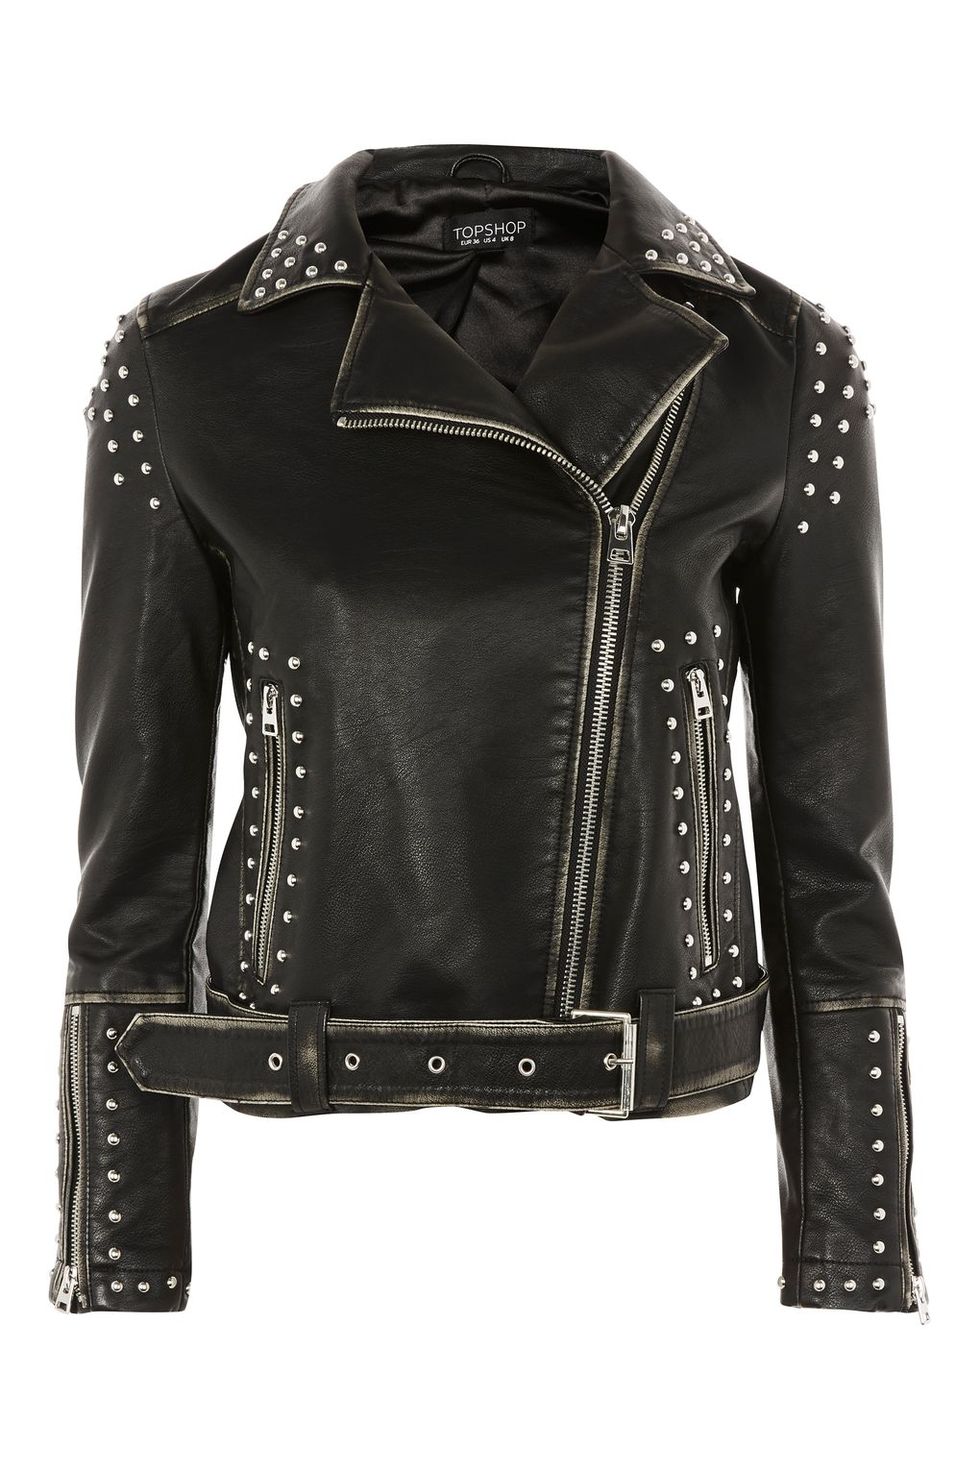 Clothing, Jacket, Leather, Leather jacket, Outerwear, Black, Sleeve, Textile, Top, Collar, 